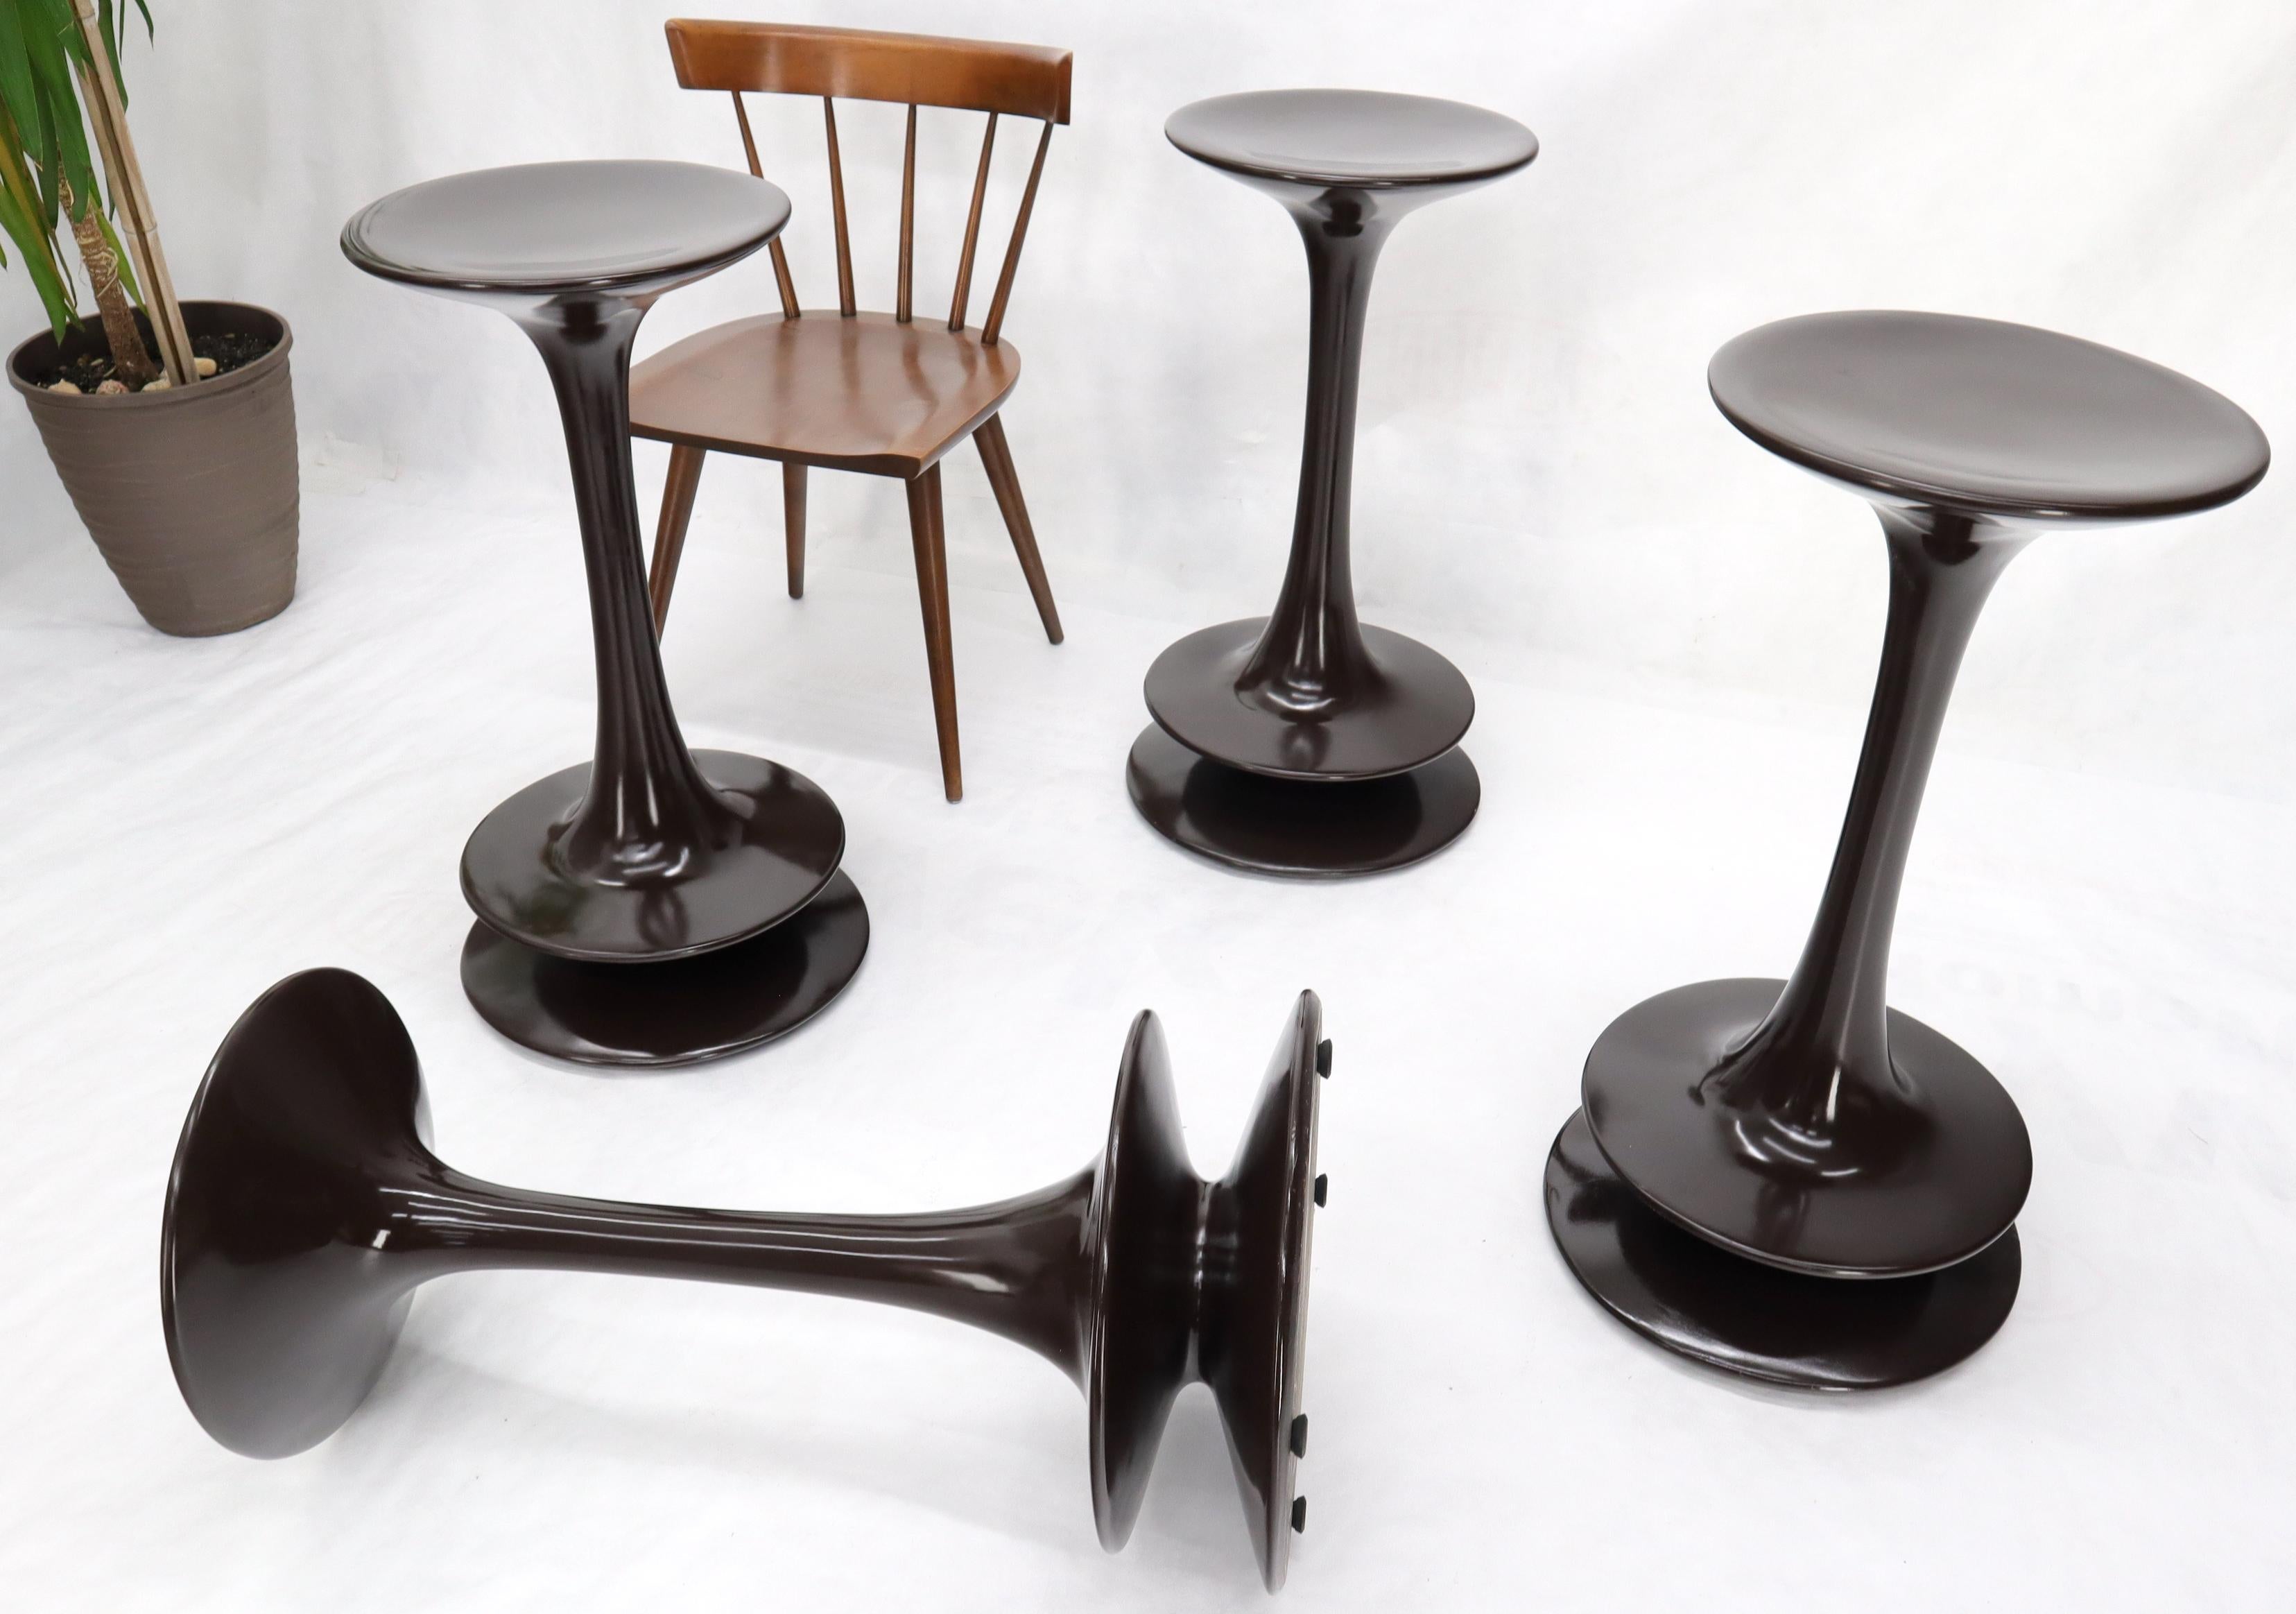 Set of unique studio made polished composite weighted bottoms round bar stools.